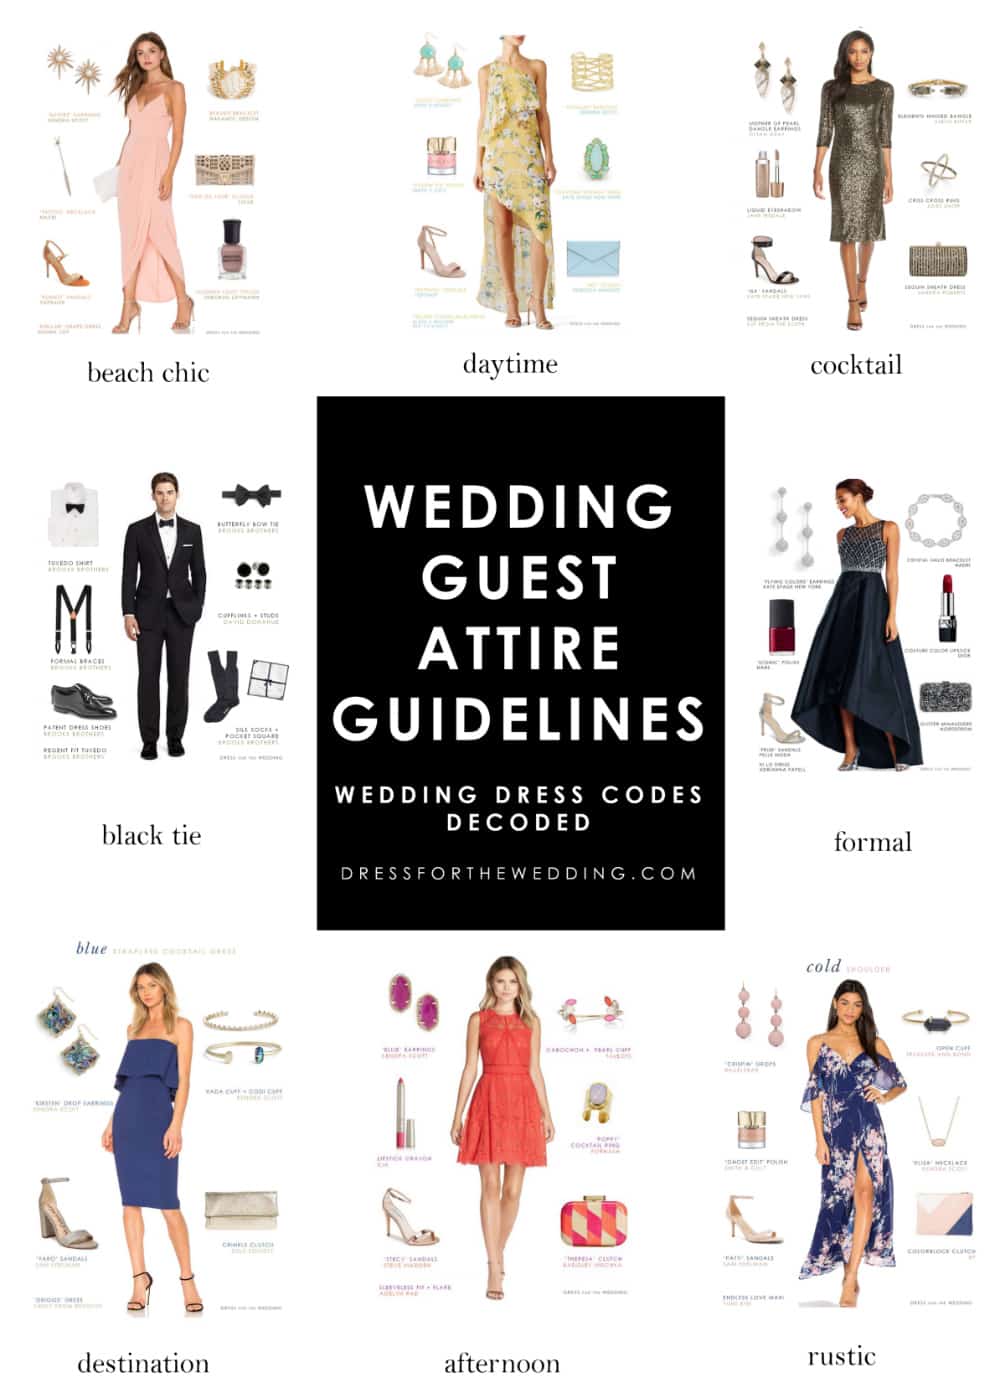 daytime wedding dresses for guests